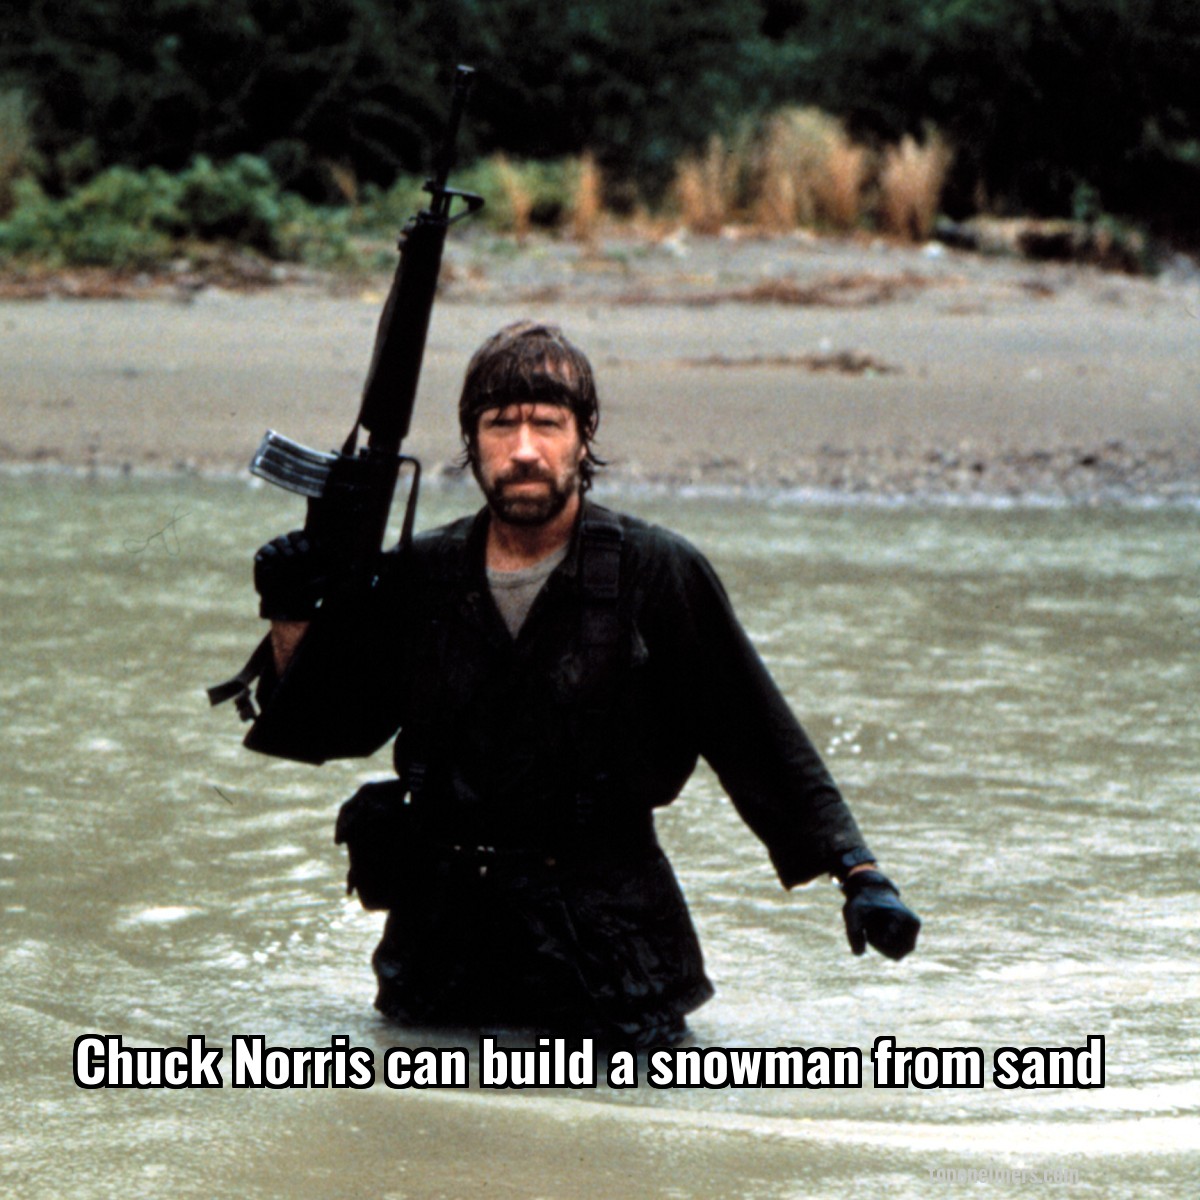 Chuck Norris can build a snowman from sand